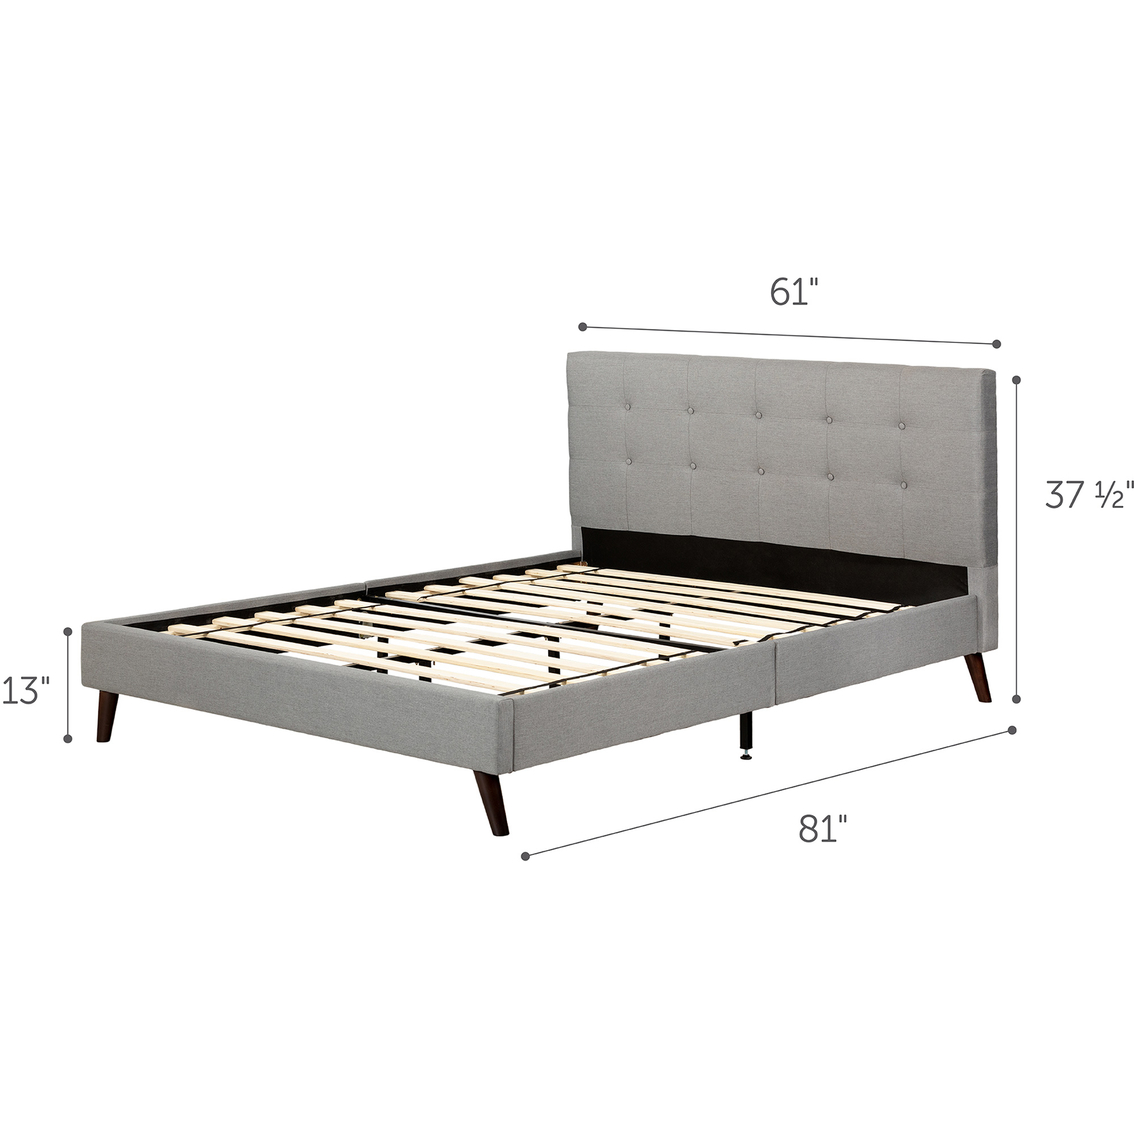 South Shore Fusion Complete Upholstered Bed - Image 8 of 8